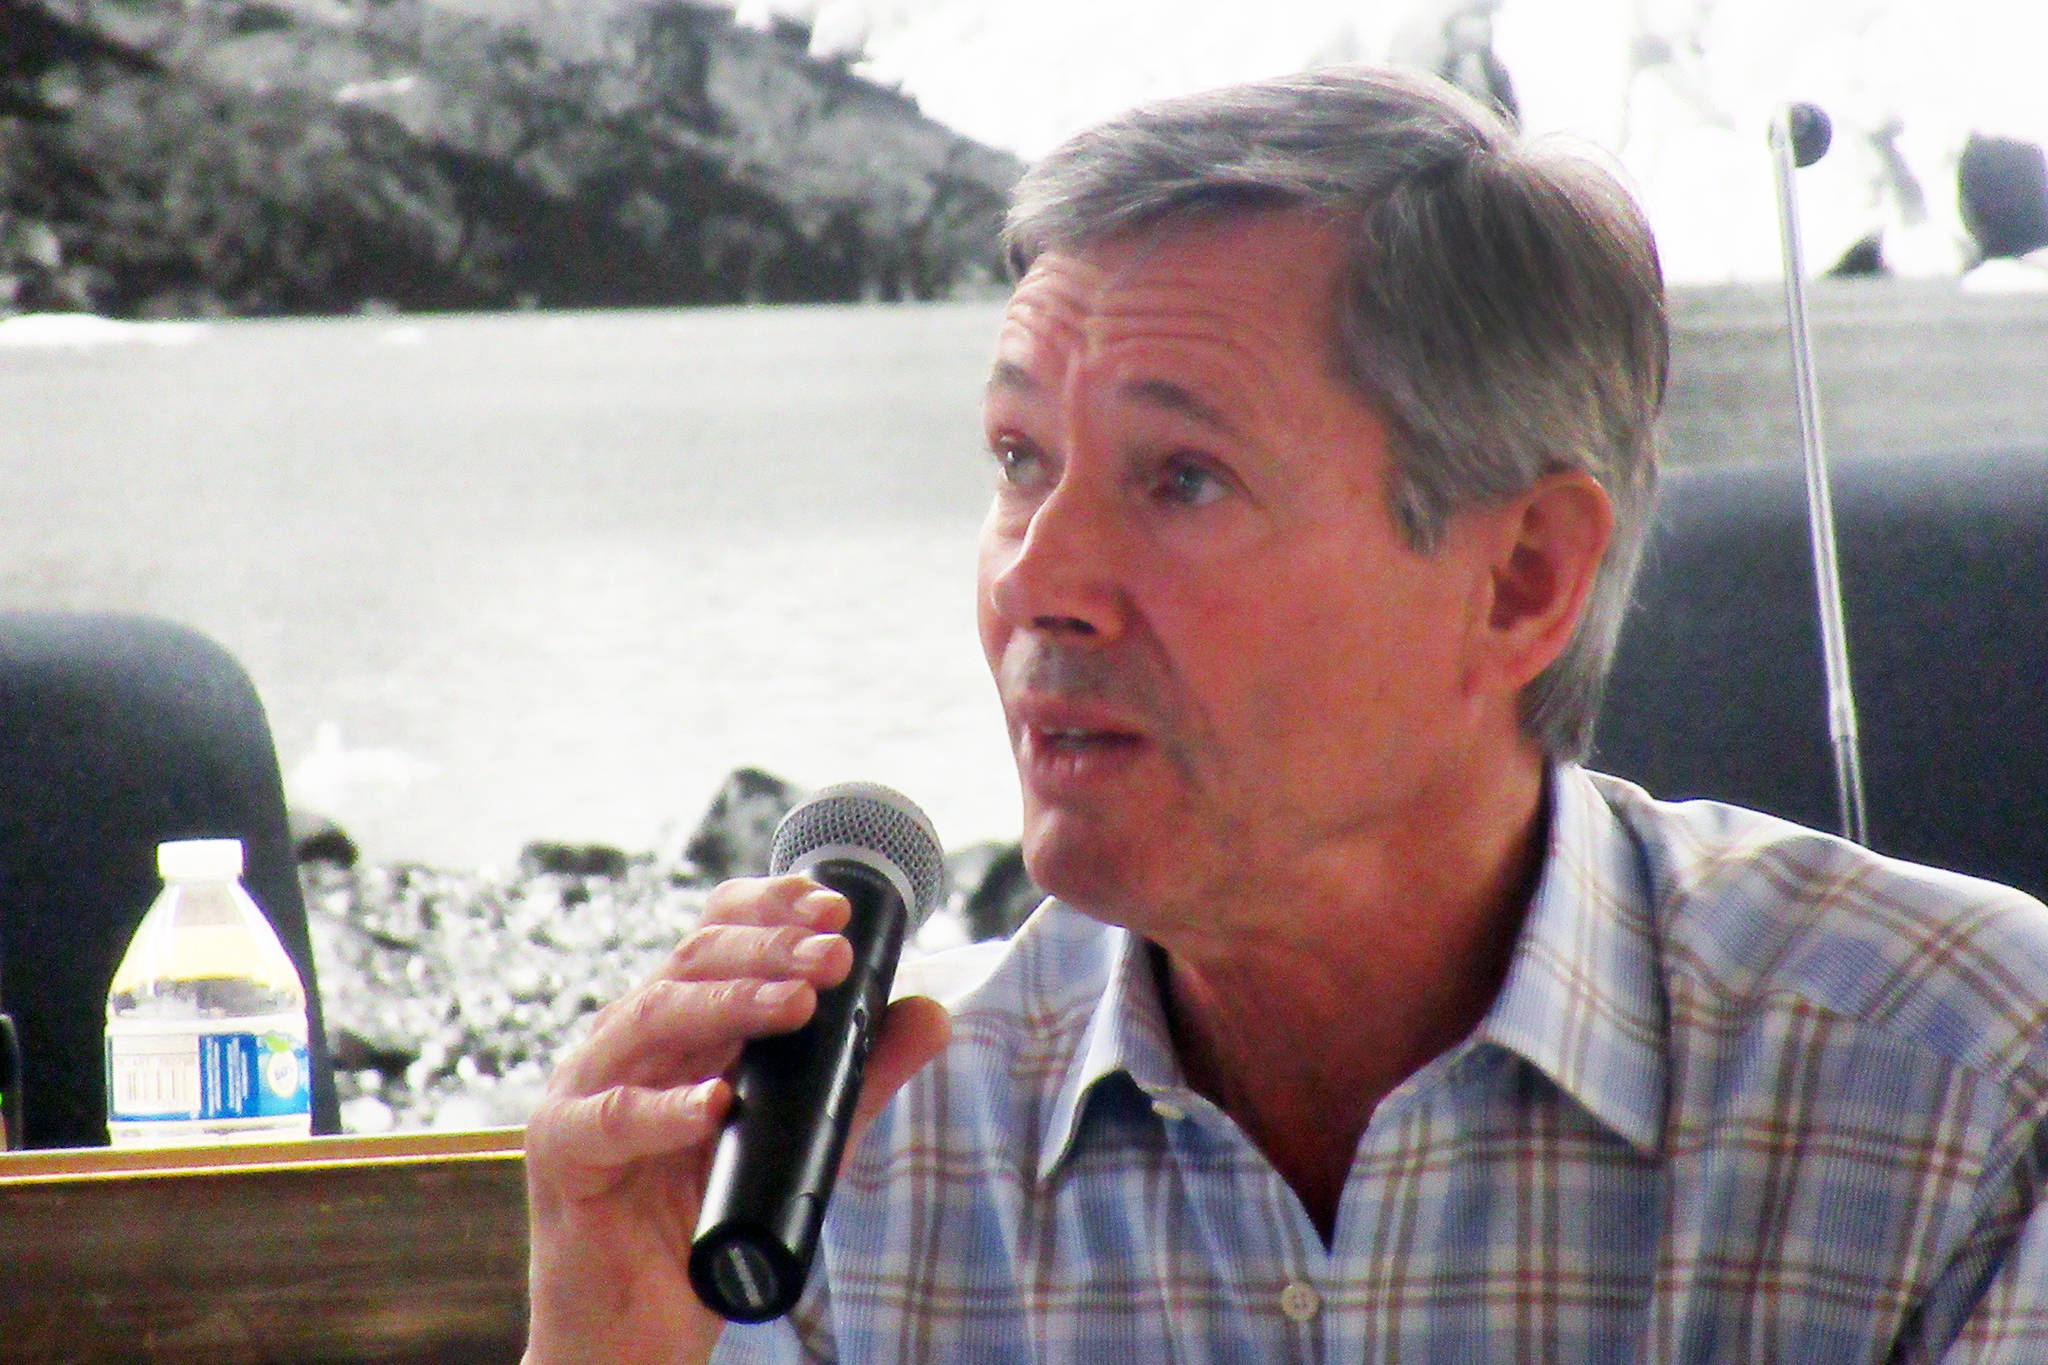 John Binkley, Cruise Lines International Association Alaska President, discusses sustainability and tourism in Juneau during a sustainability session, Thursday April 18, 2019. (Ben Hohenstatt | Juneau Empire)